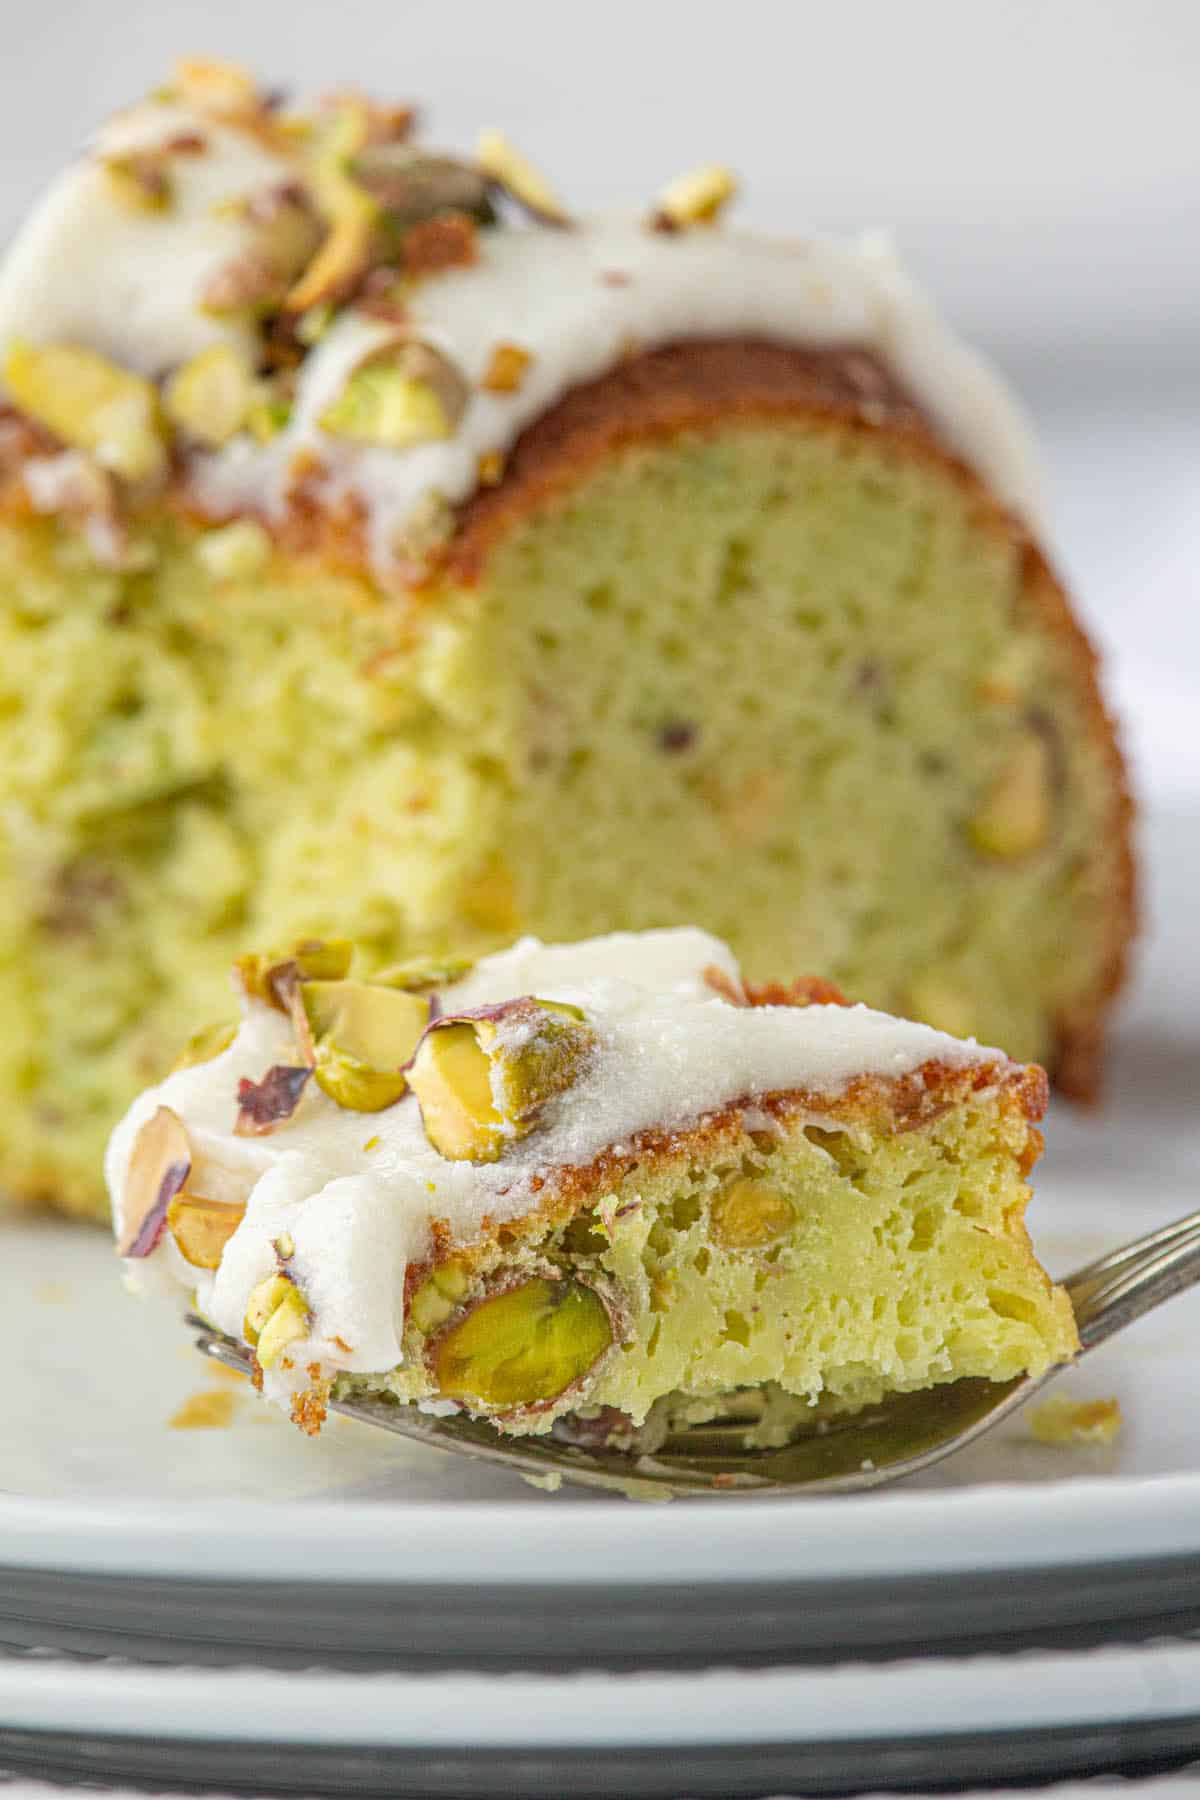 A slice of Pistachio Bundt Cake on a plate with a fork that is filled with a bite of cake.